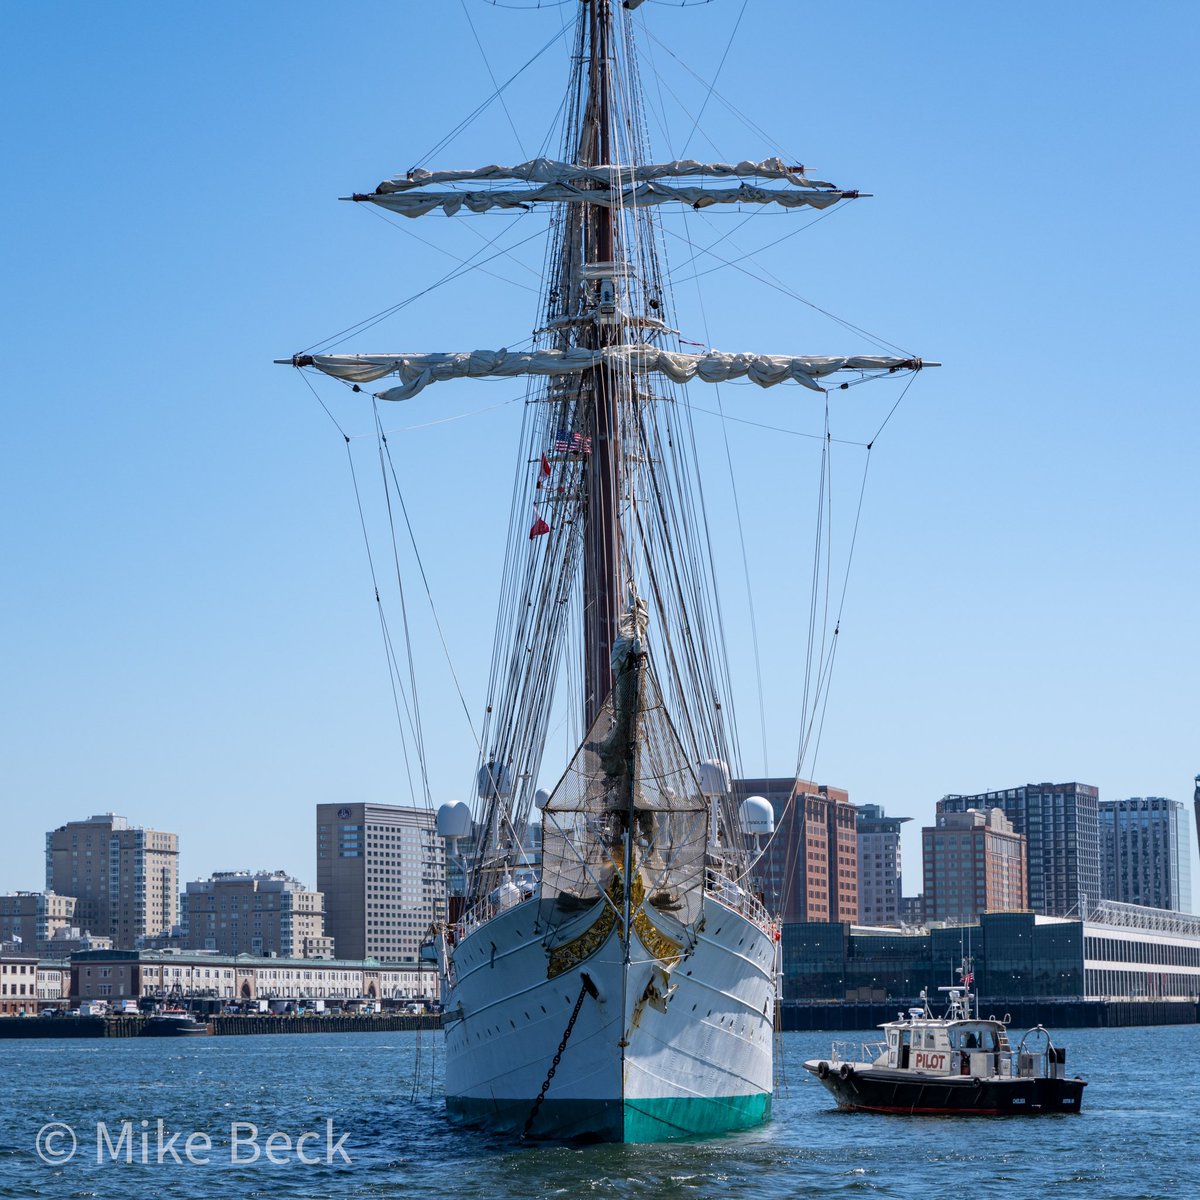 Spanish Navy training ship Juan Sebastian de Elcano in Boston Harbor this afternoon. 371’ long, 3rd largest tall ship in the world. It’s travelled 2.3 million miles in its lifetime. @ericfisher @SurfSkiWeather @Eweather13